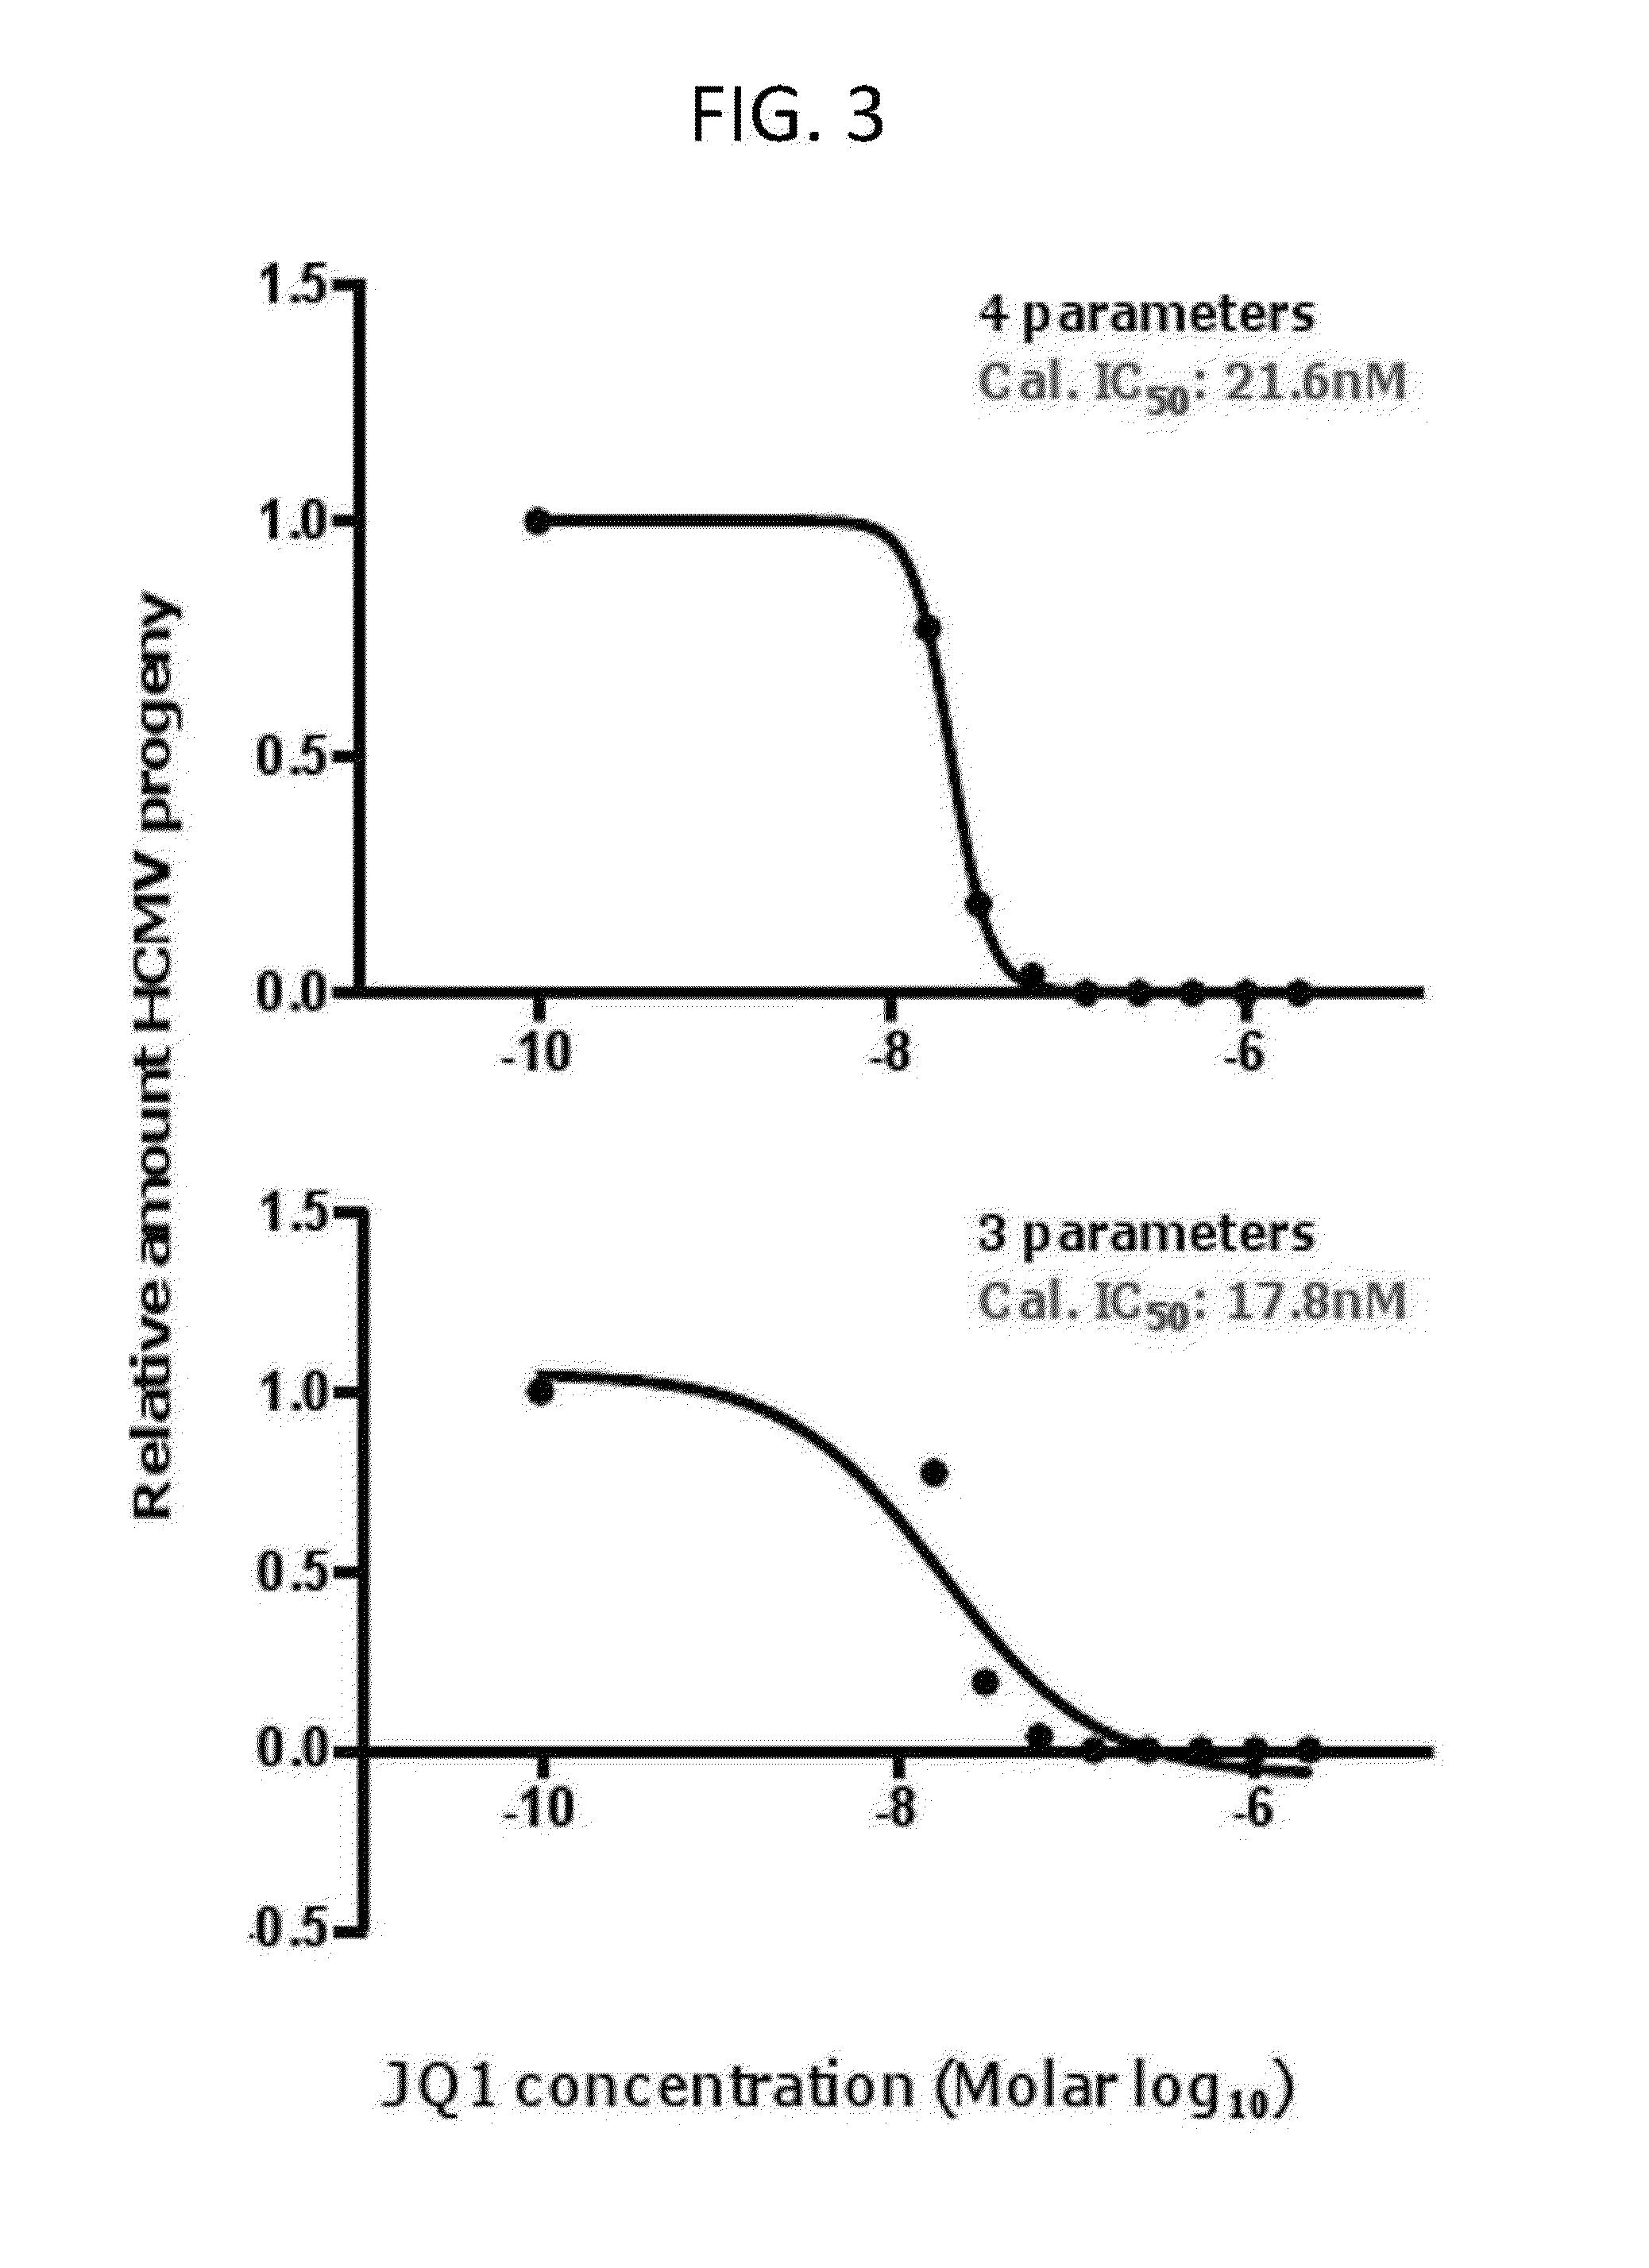 Methods of treatment of human cytomegalovirus infection and diseases with bromodomain inhibitors